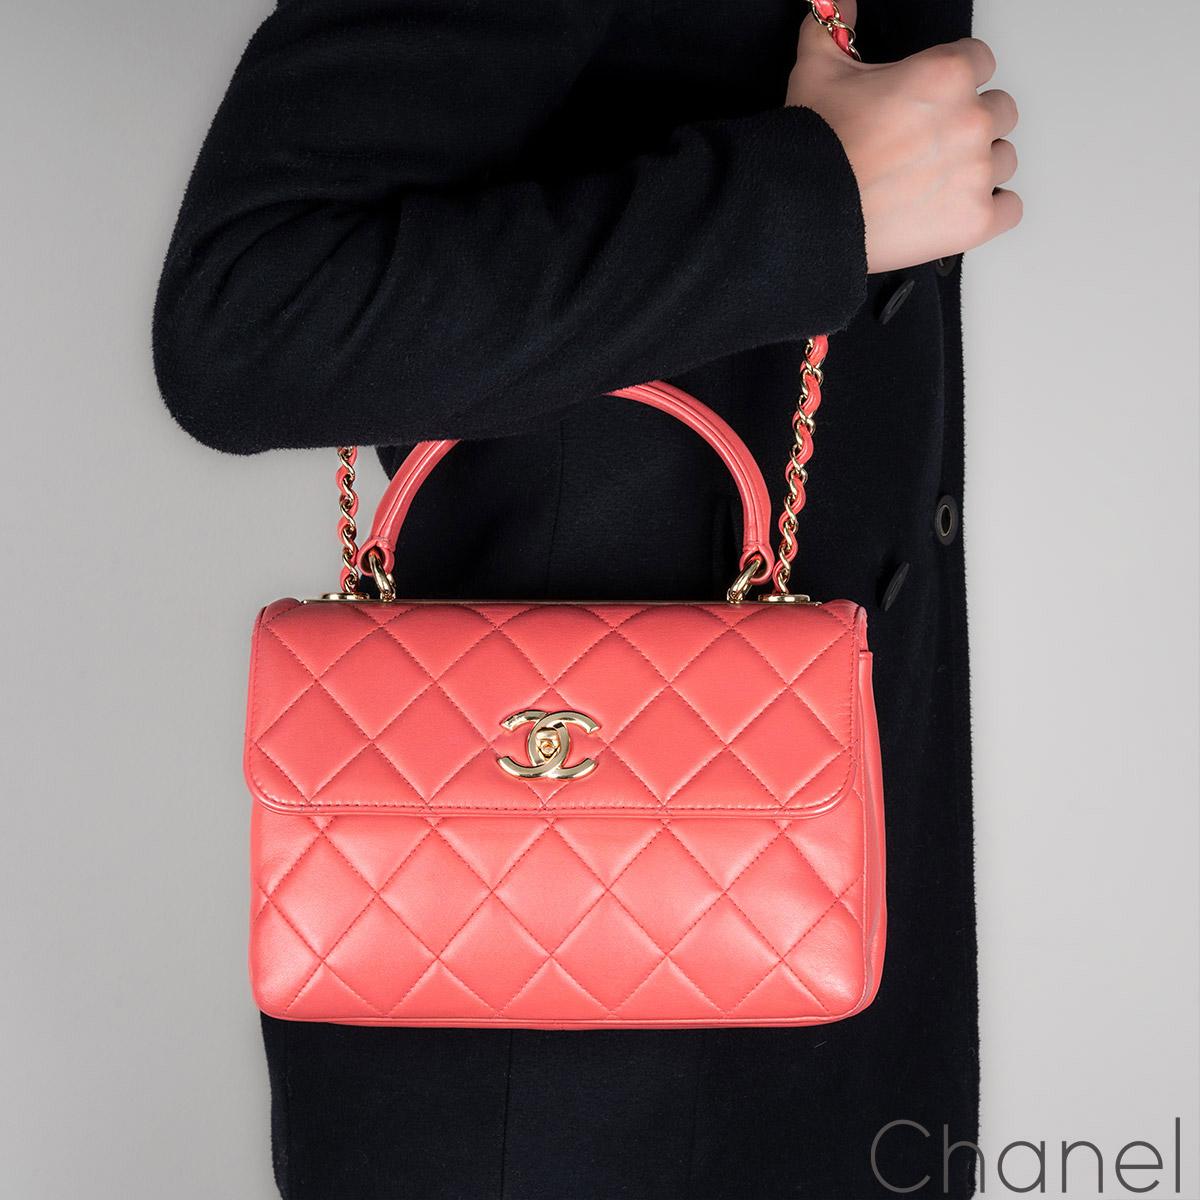 Chanel Small Pink Trendy CC Flap Bag For Sale 4